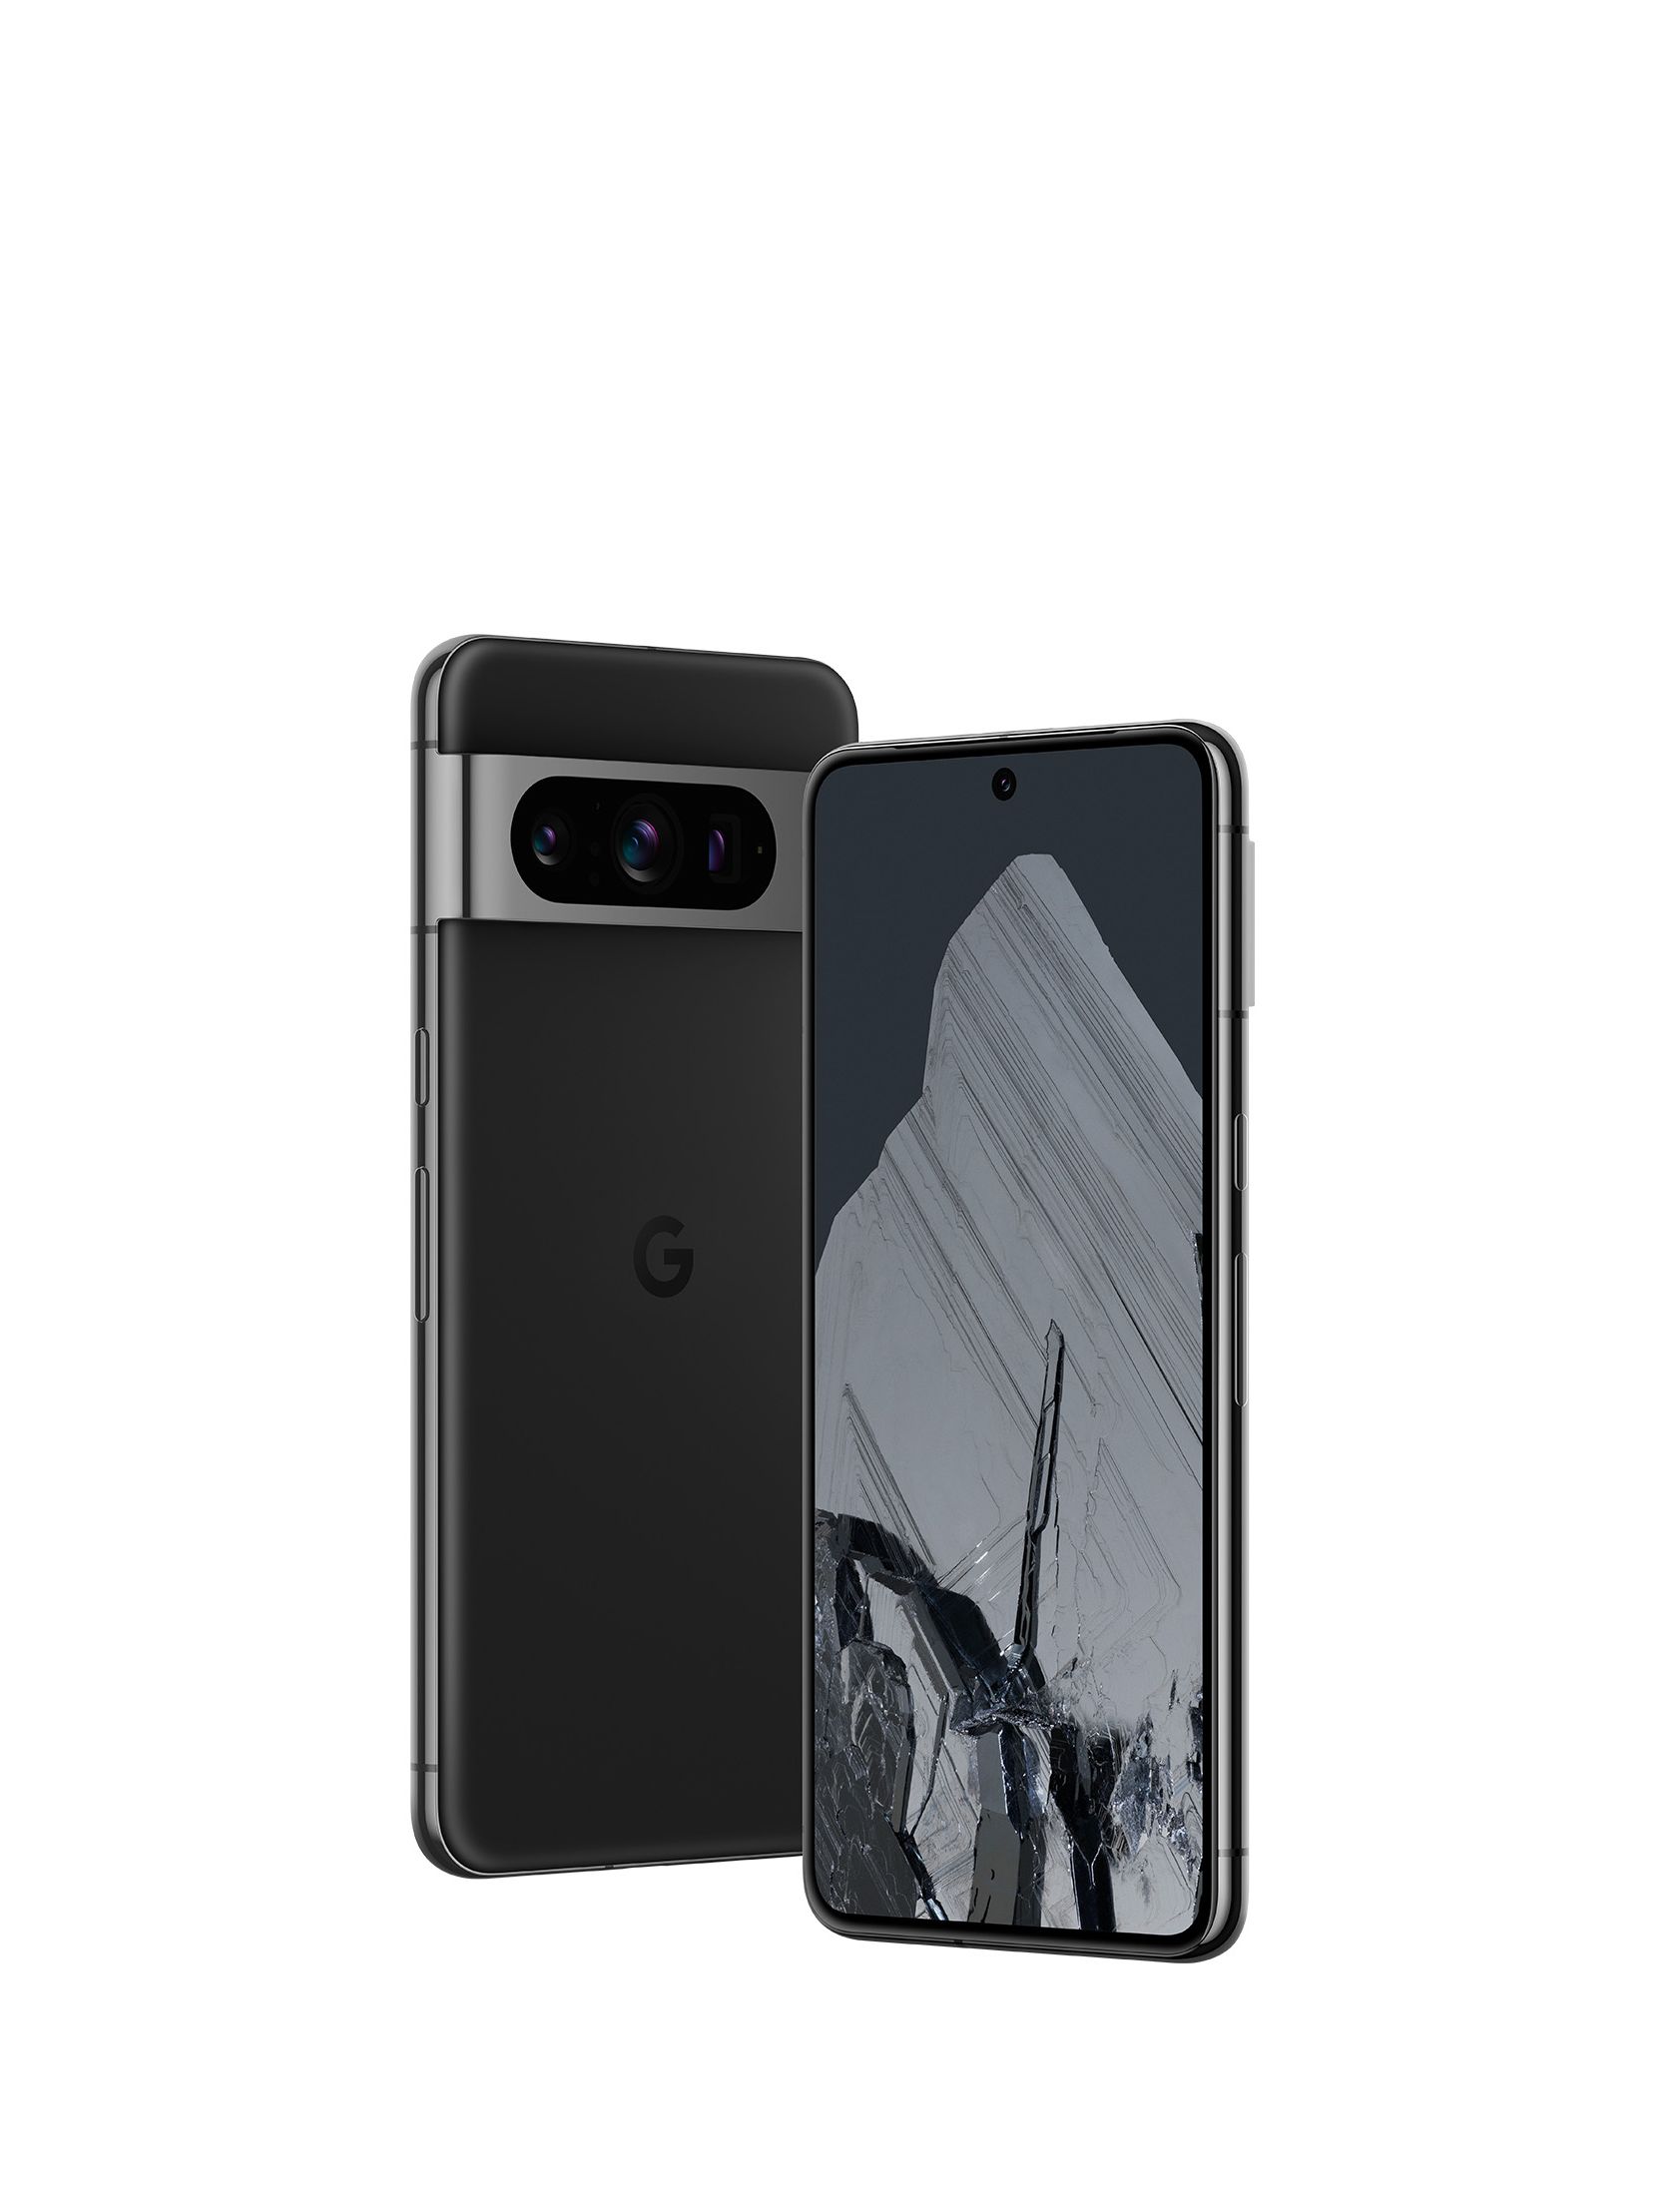 Google Pixel 8 availability, price, and delivery date detailed